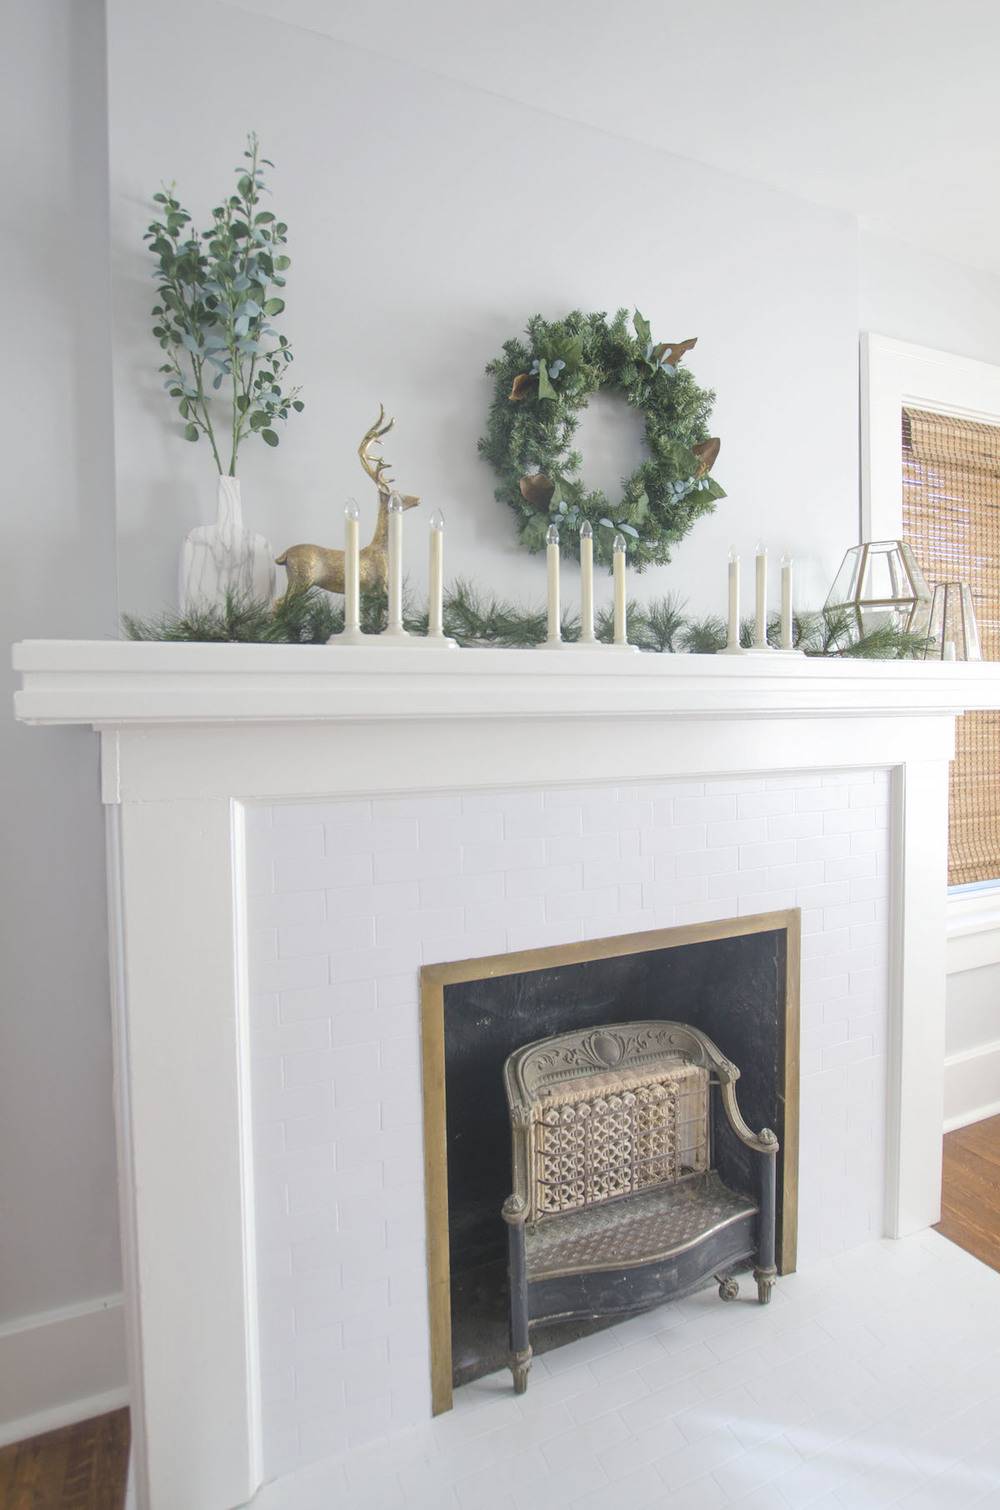 Fireplace Mantel Makeover